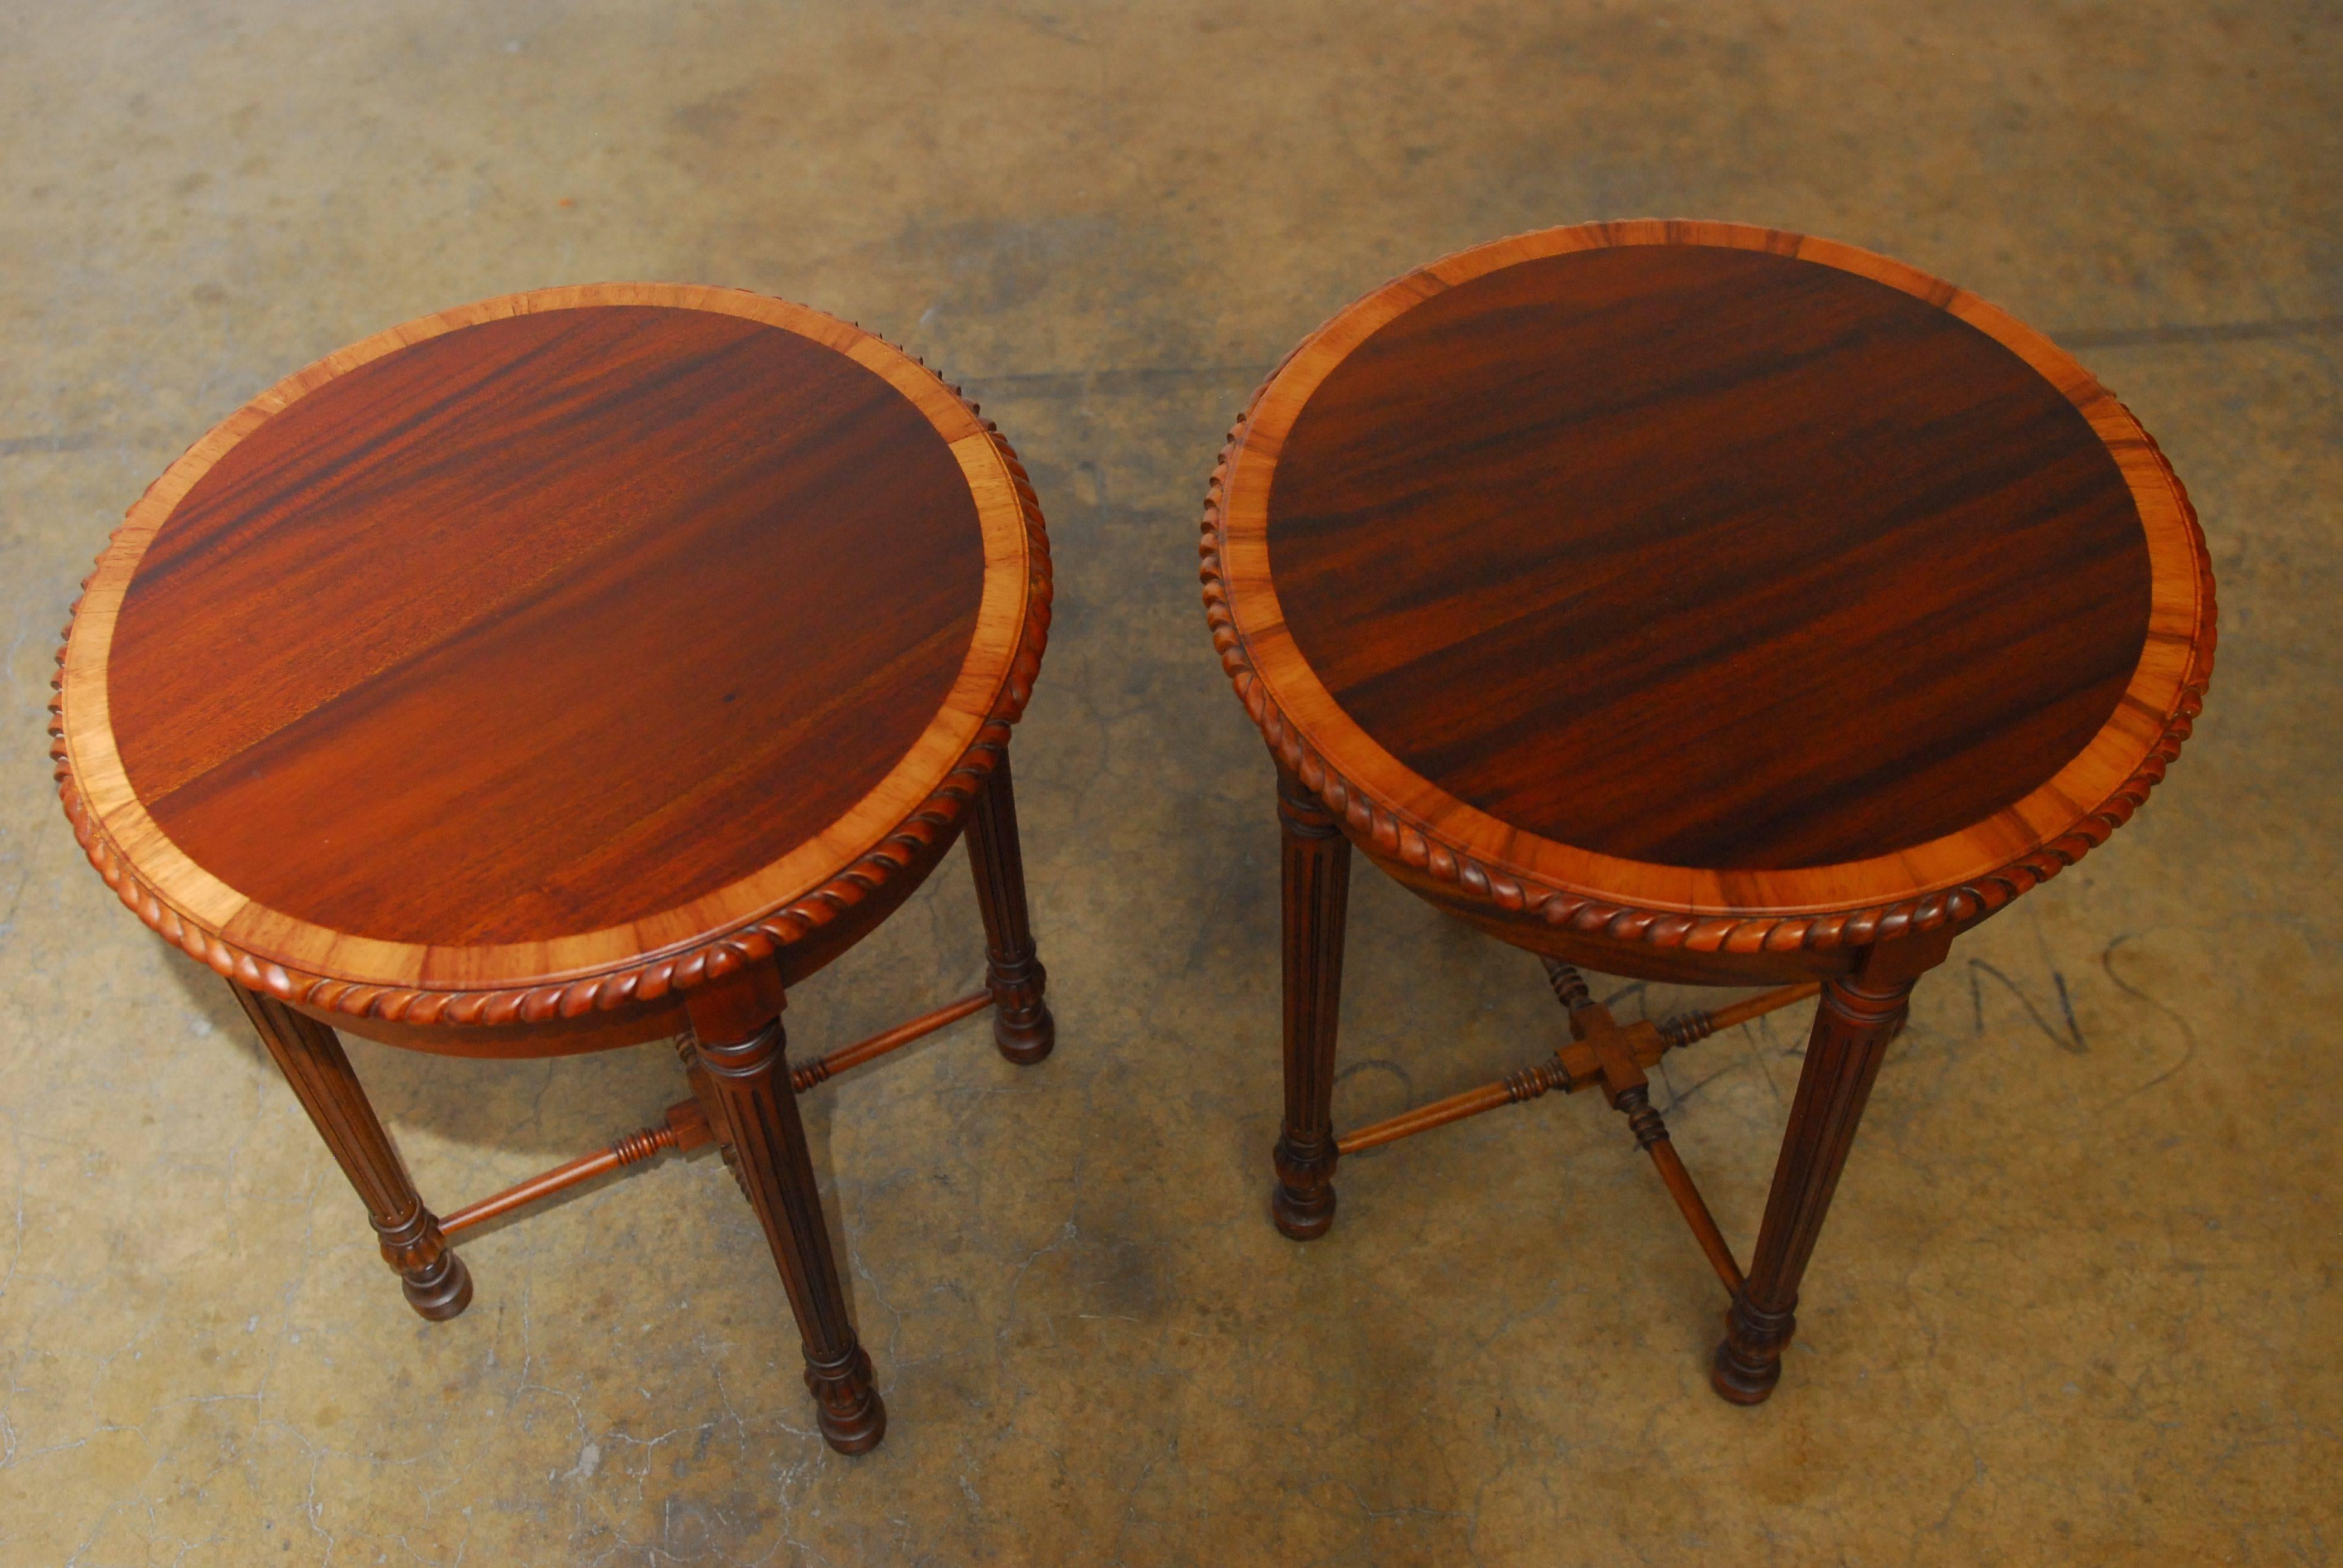 Hand-Carved Pair of Regency Carved Mahogany Gueridon Side Tables